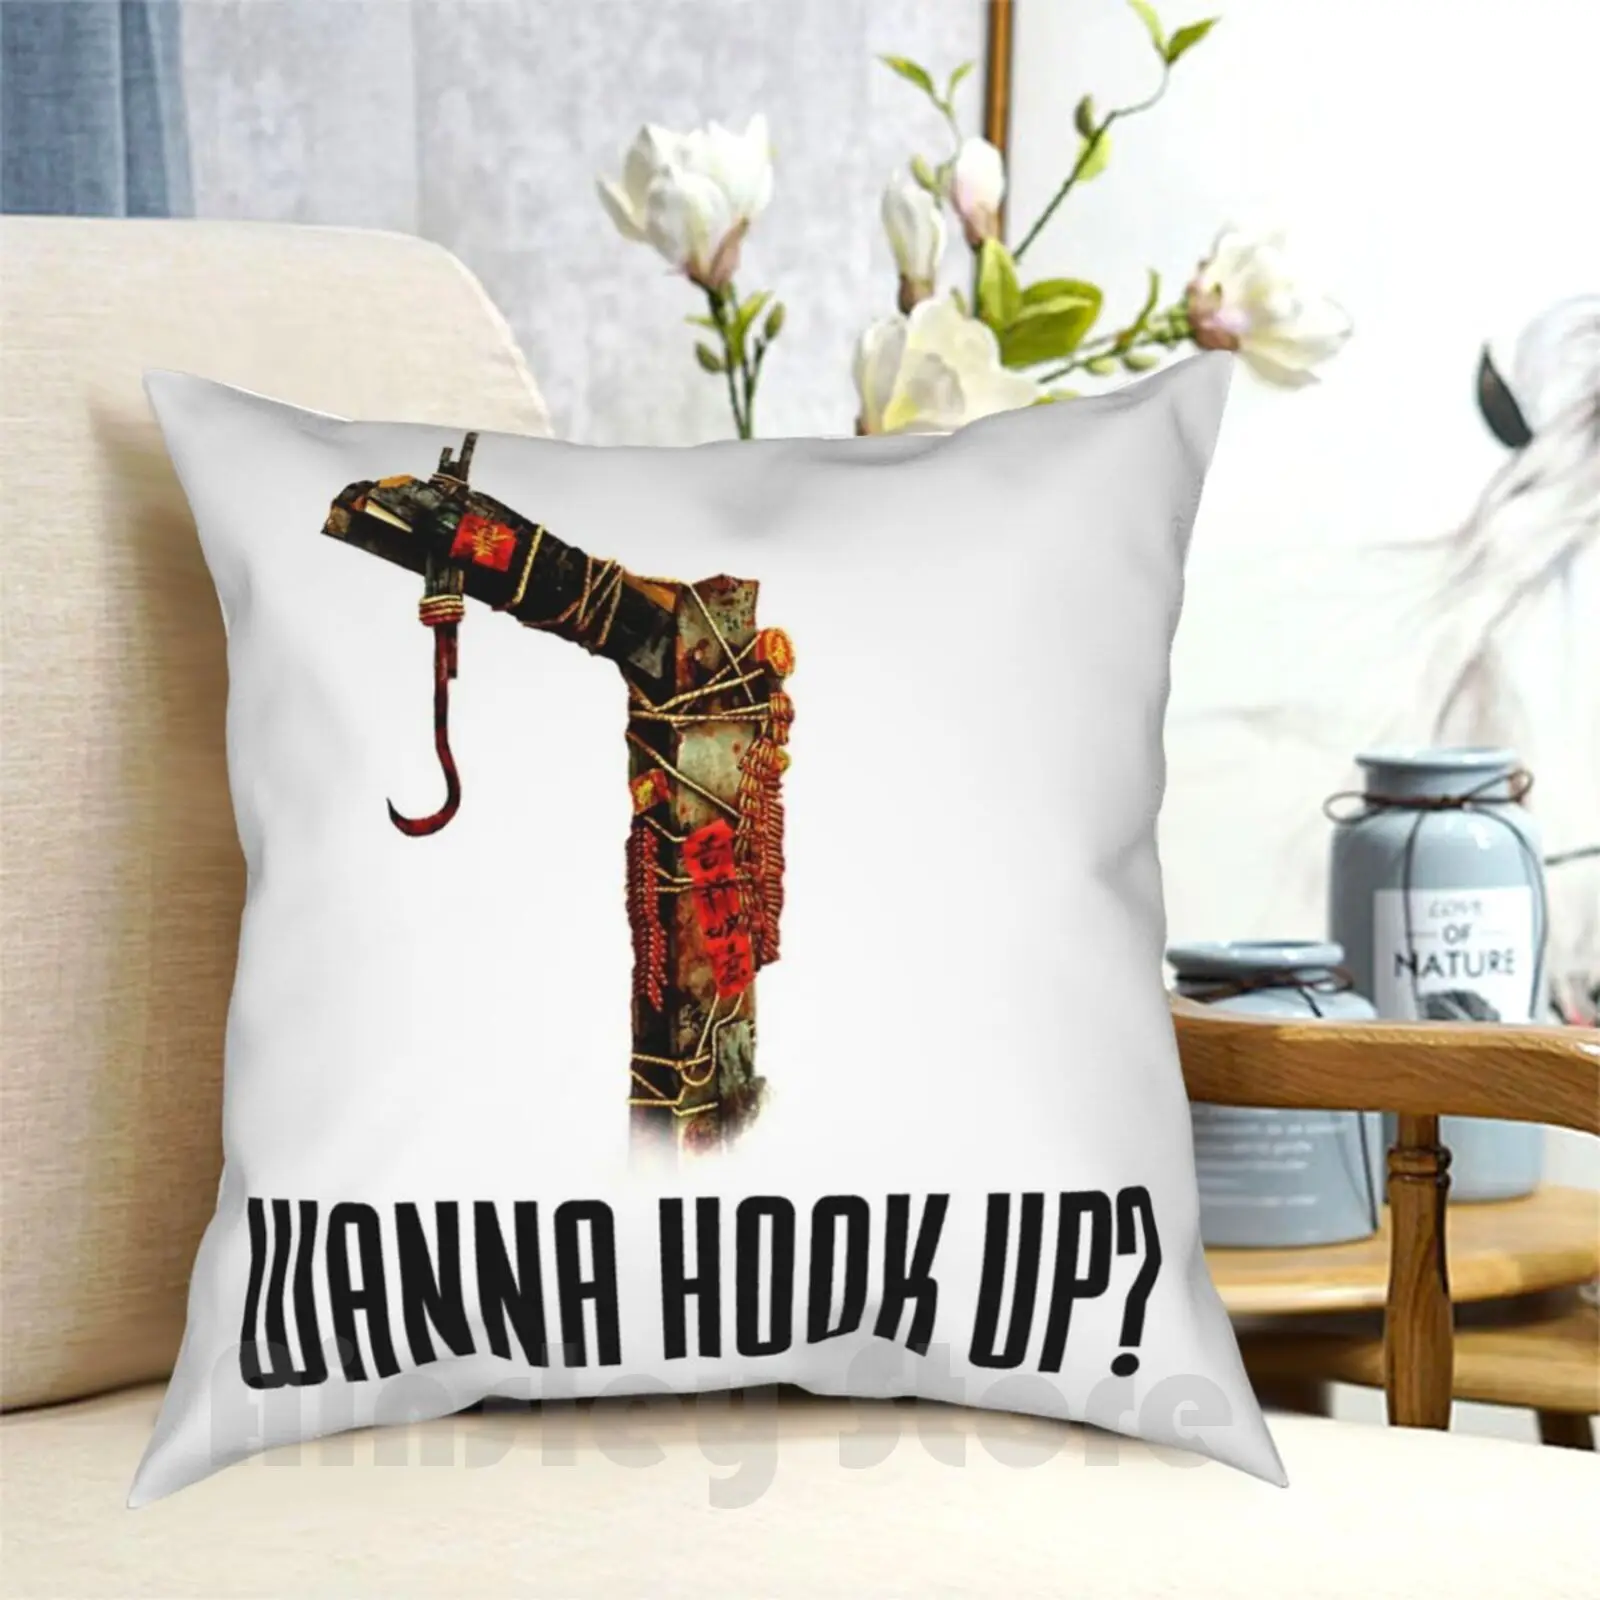 

Hook Up Pillow Case Printed Home Soft Throw Pillow Dead By Daylight Dbd Momento Mori Video Games Horror Horror Killer